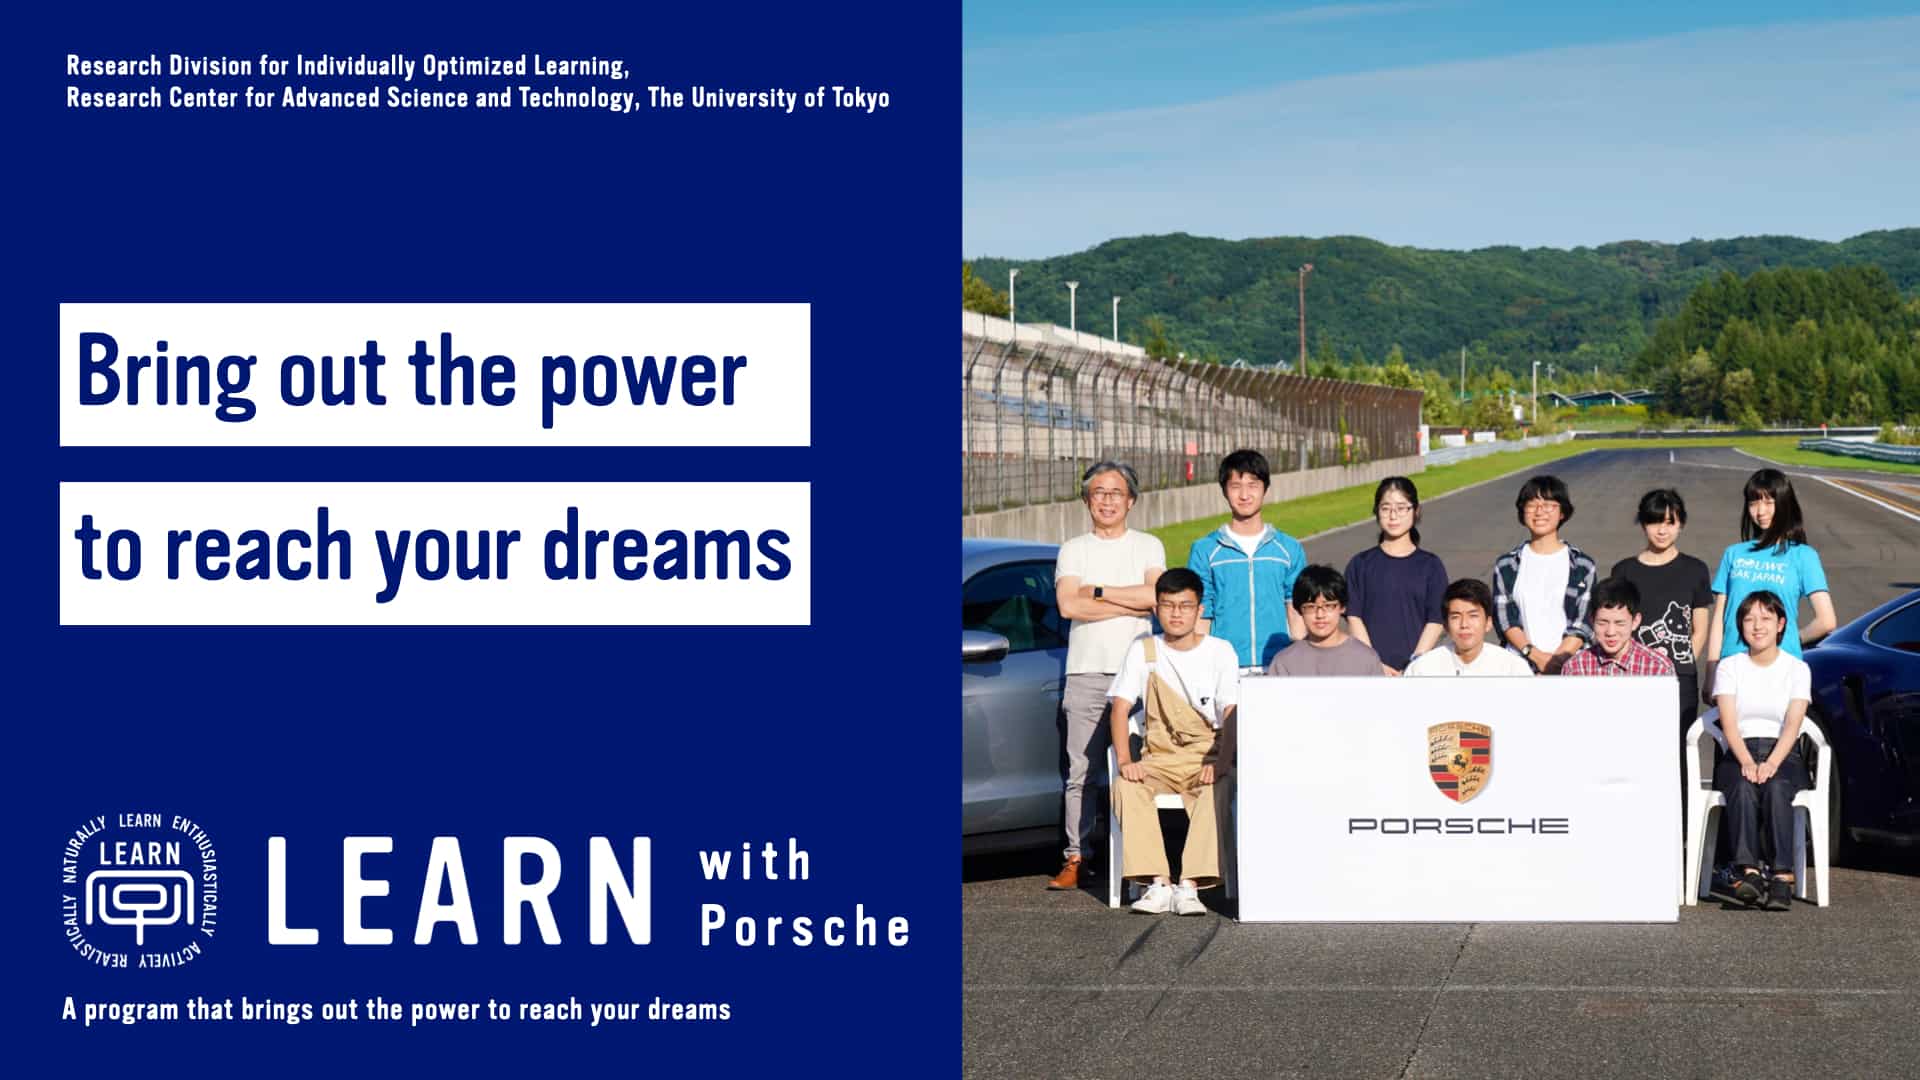 A program that empowers people to reach for their dreams